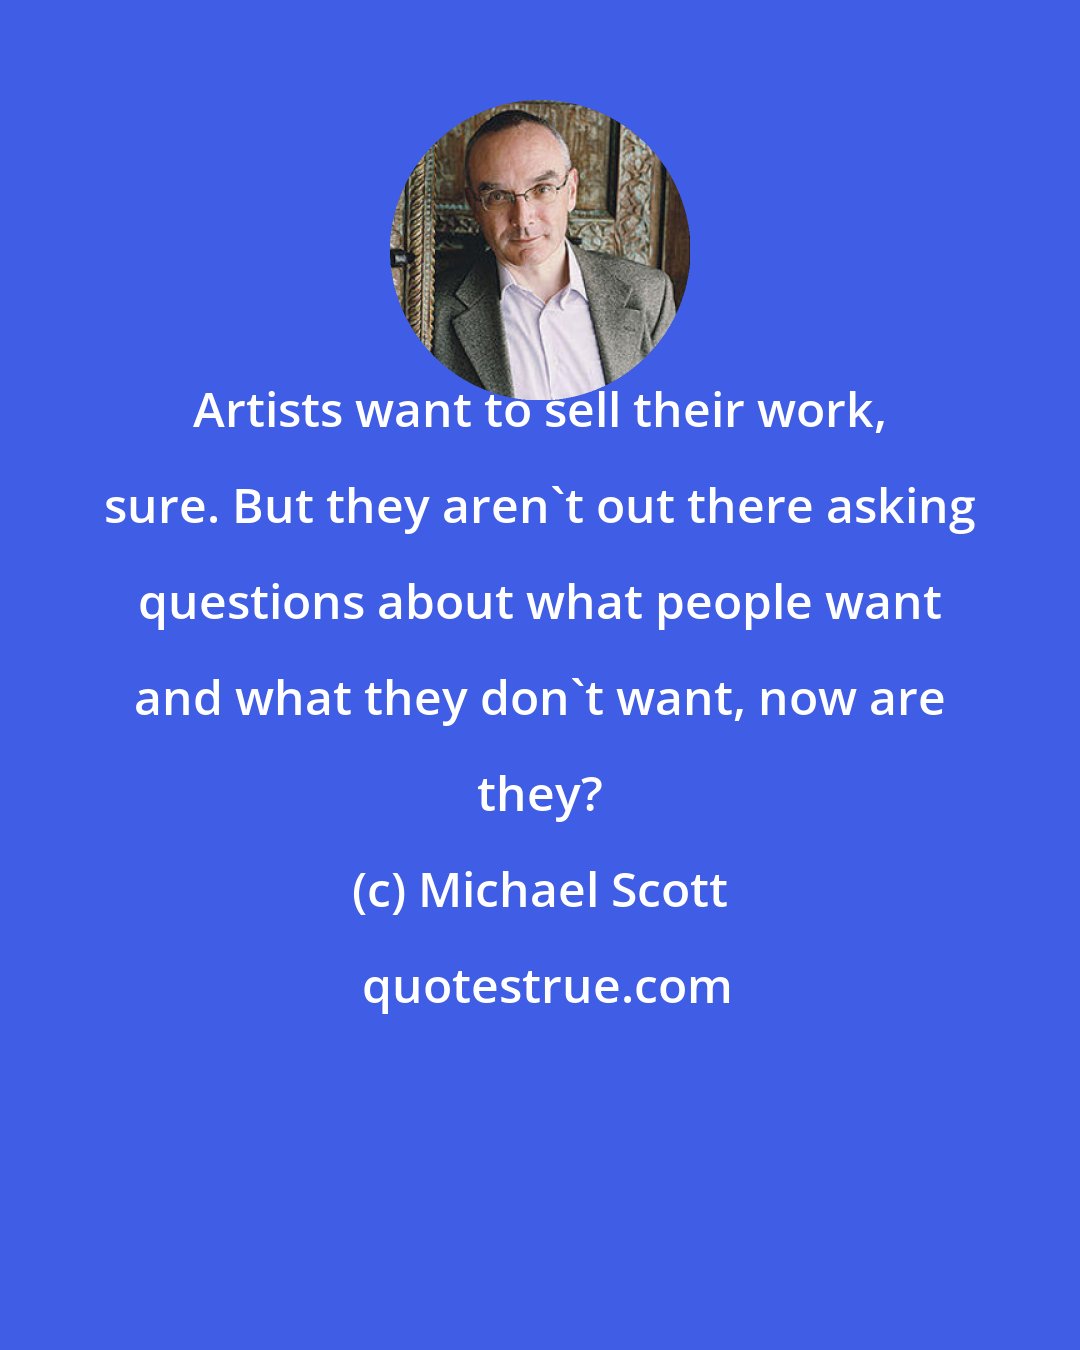 Michael Scott: Artists want to sell their work, sure. But they aren't out there asking questions about what people want and what they don't want, now are they?